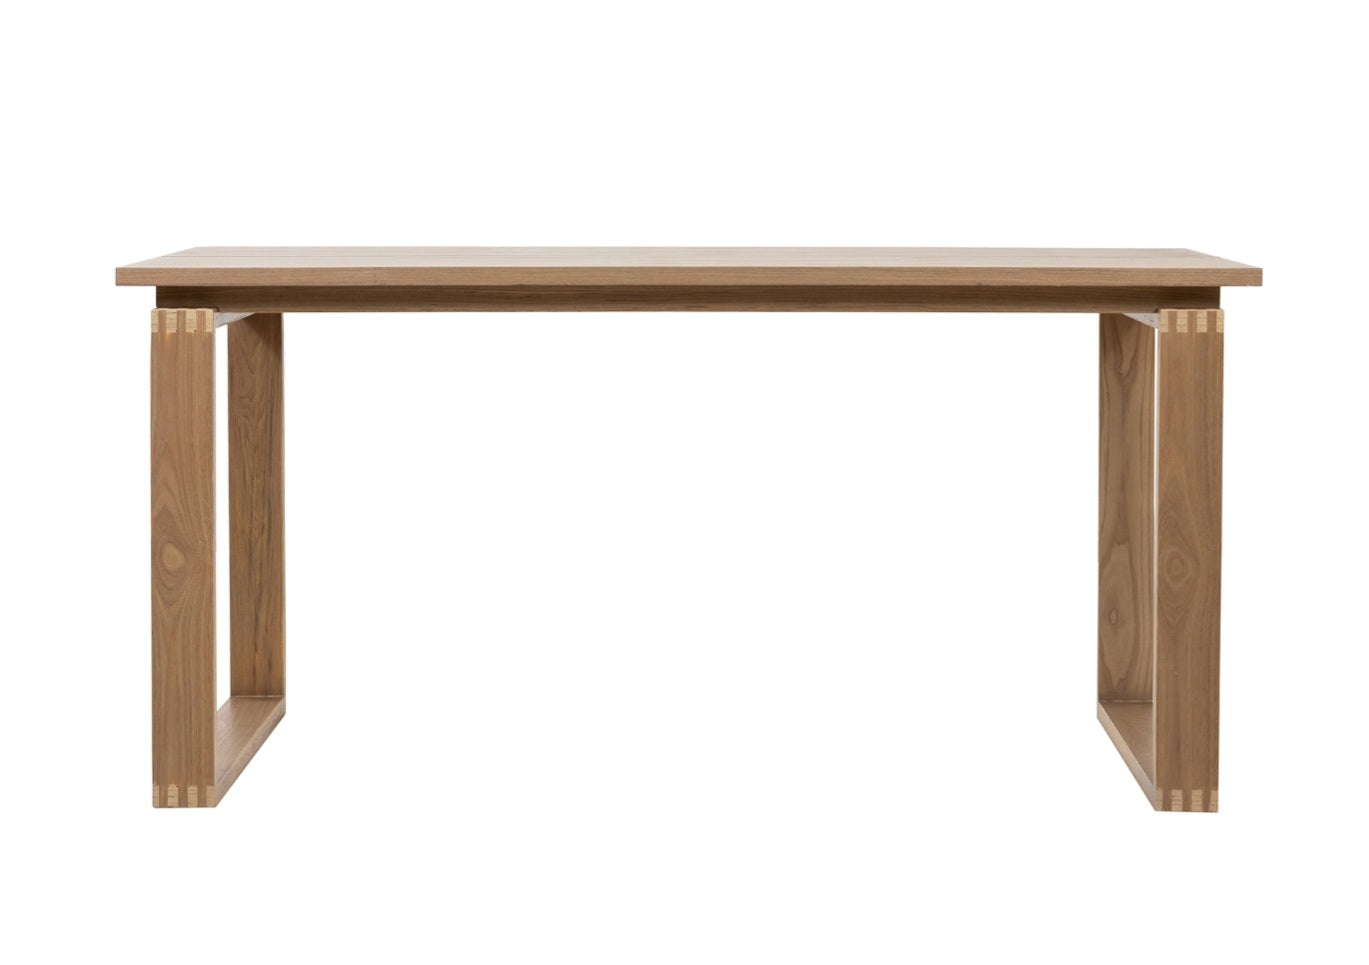 Philip Dining Table